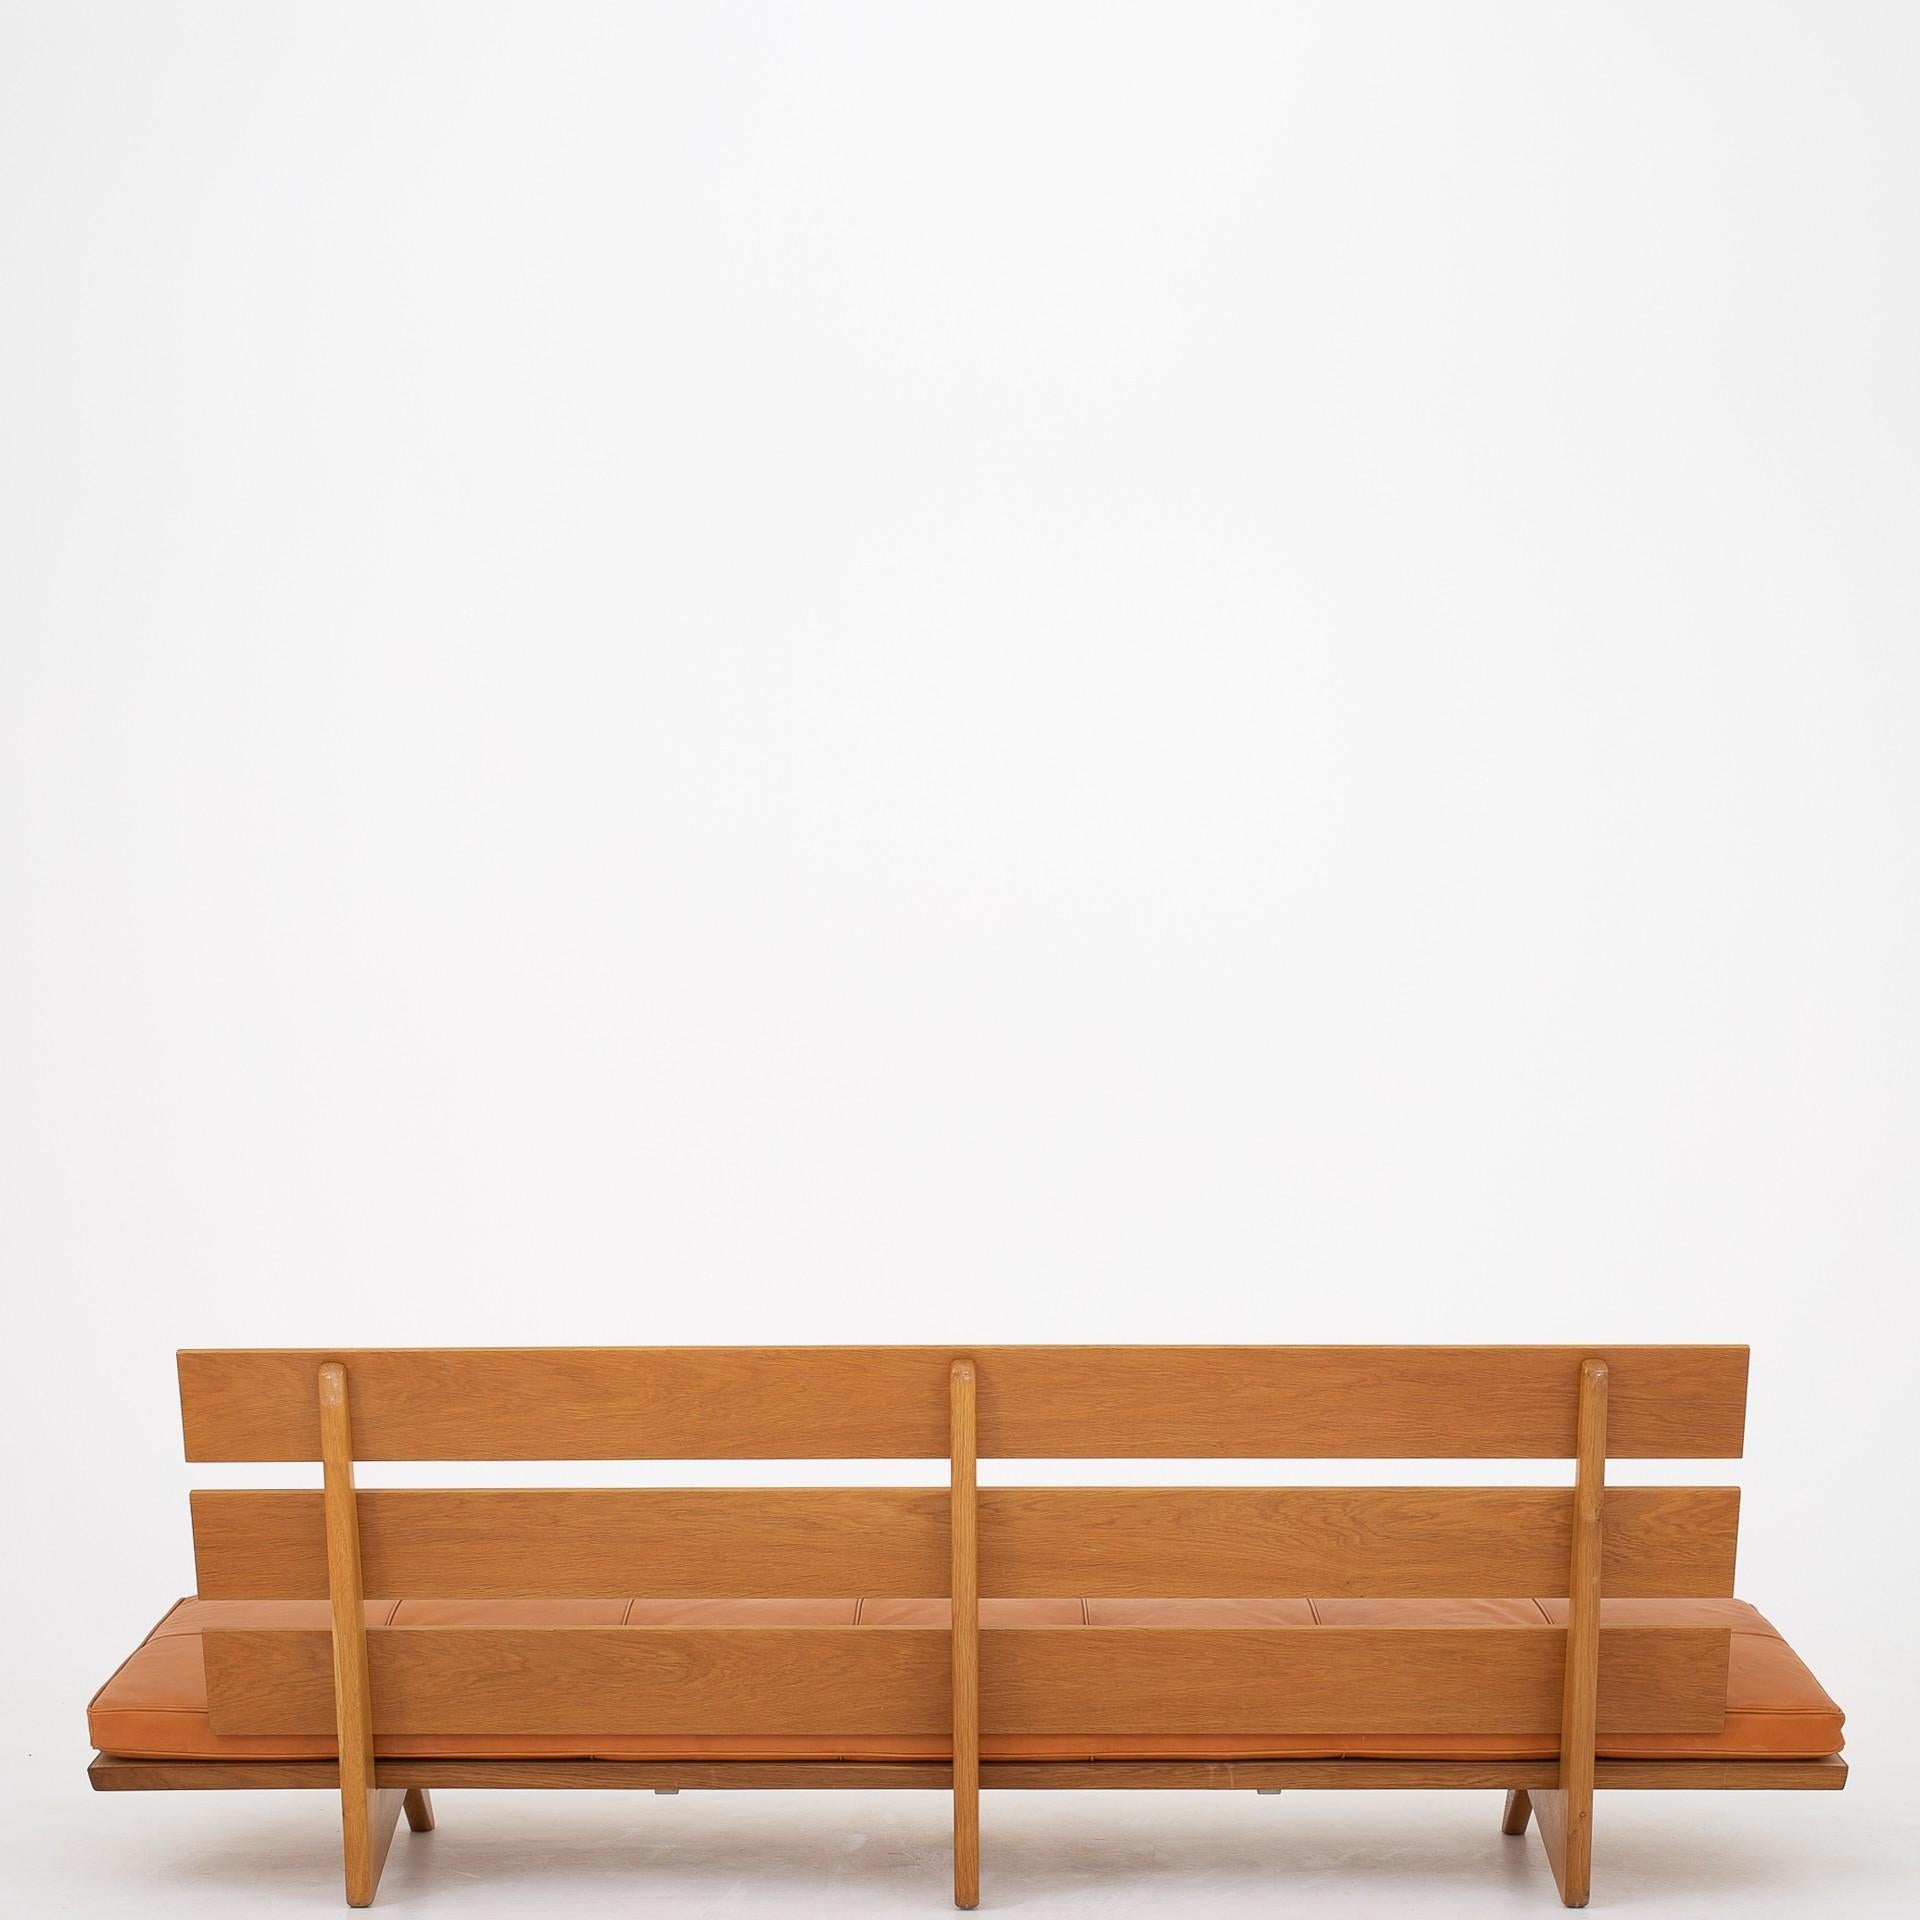 Sofa in patinated oak with cognac leather cushion.